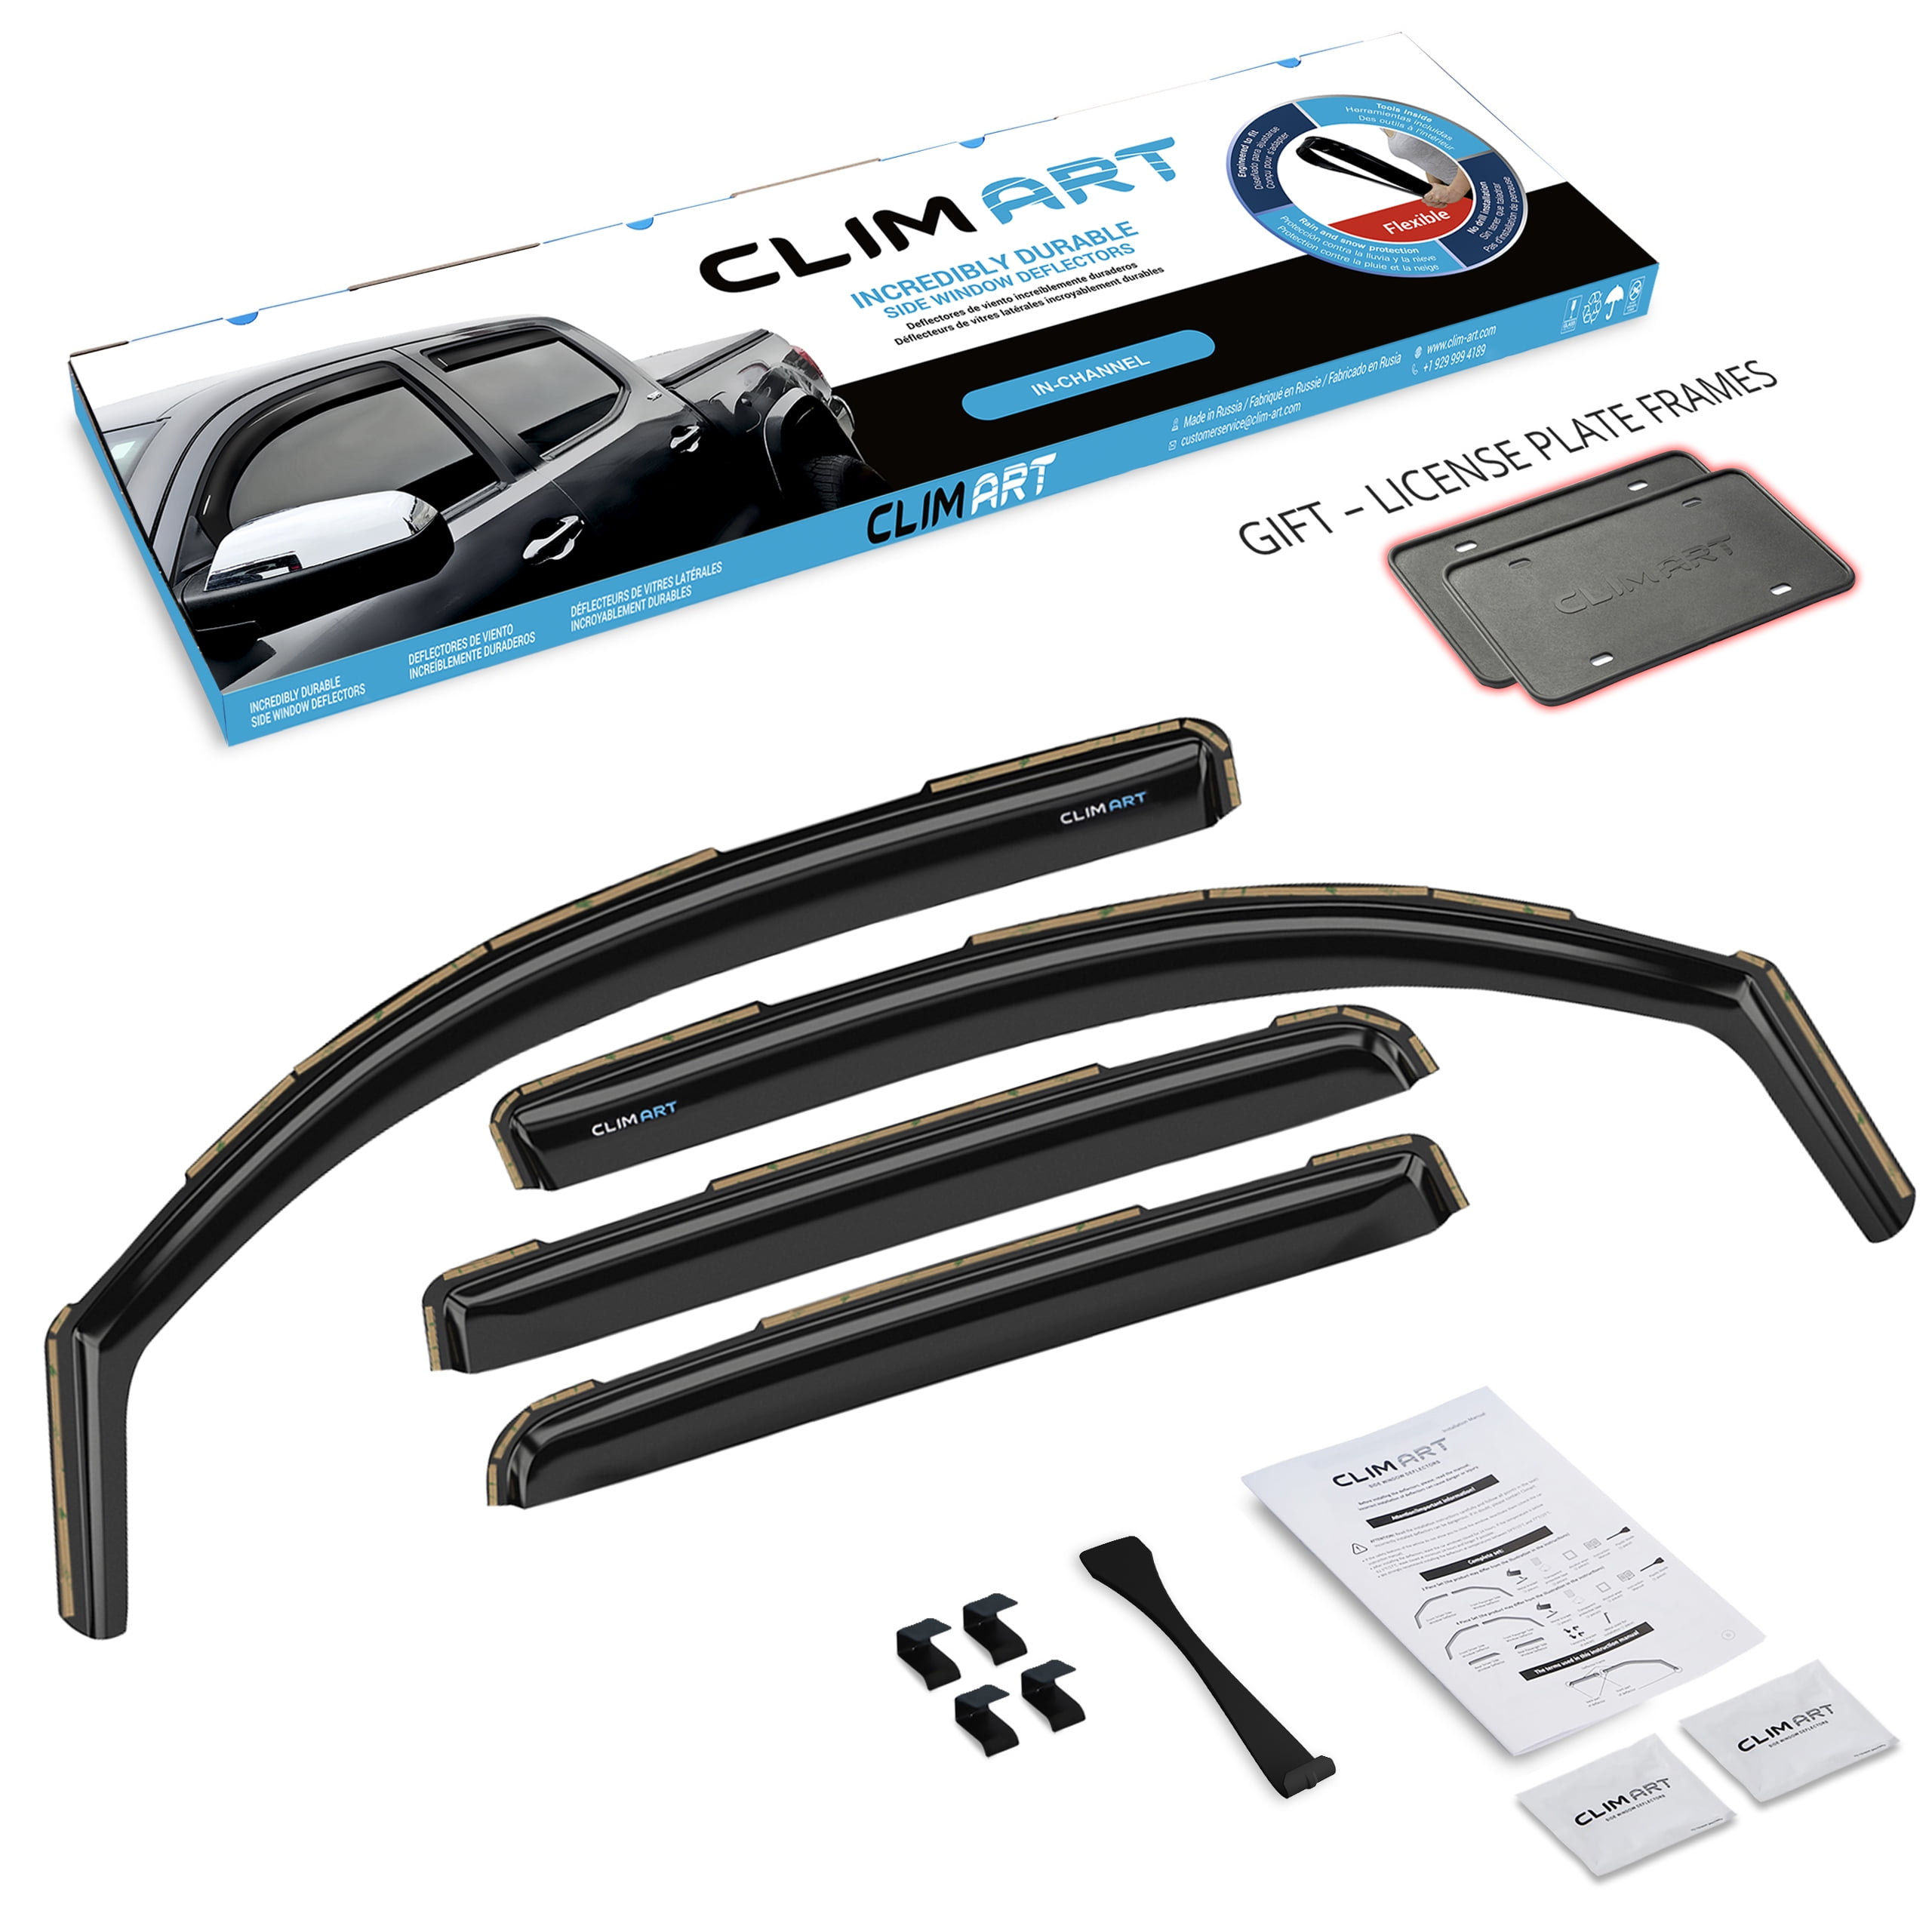 CLIM ART in-Channel Incredibly Durable Rain Guards for Toyota